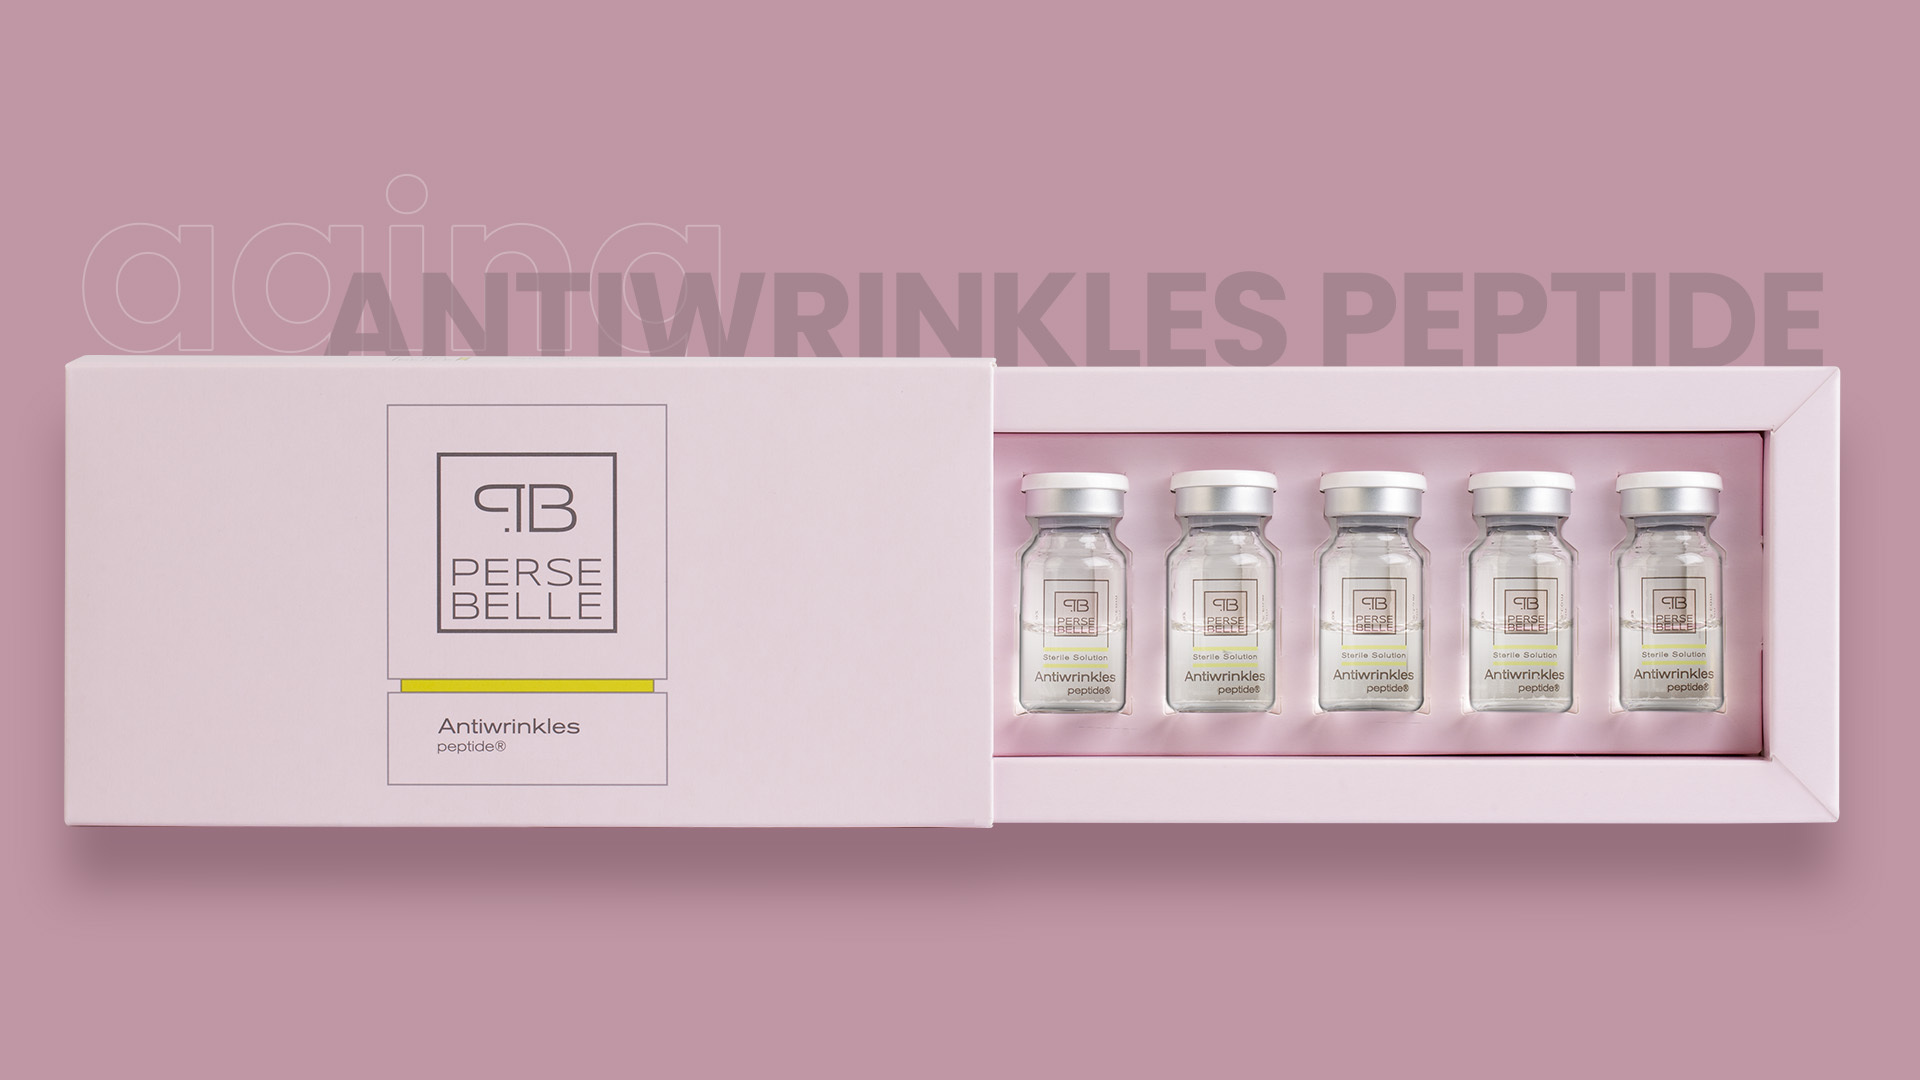 Antiwrinkles treatment for professionals - Persebelle